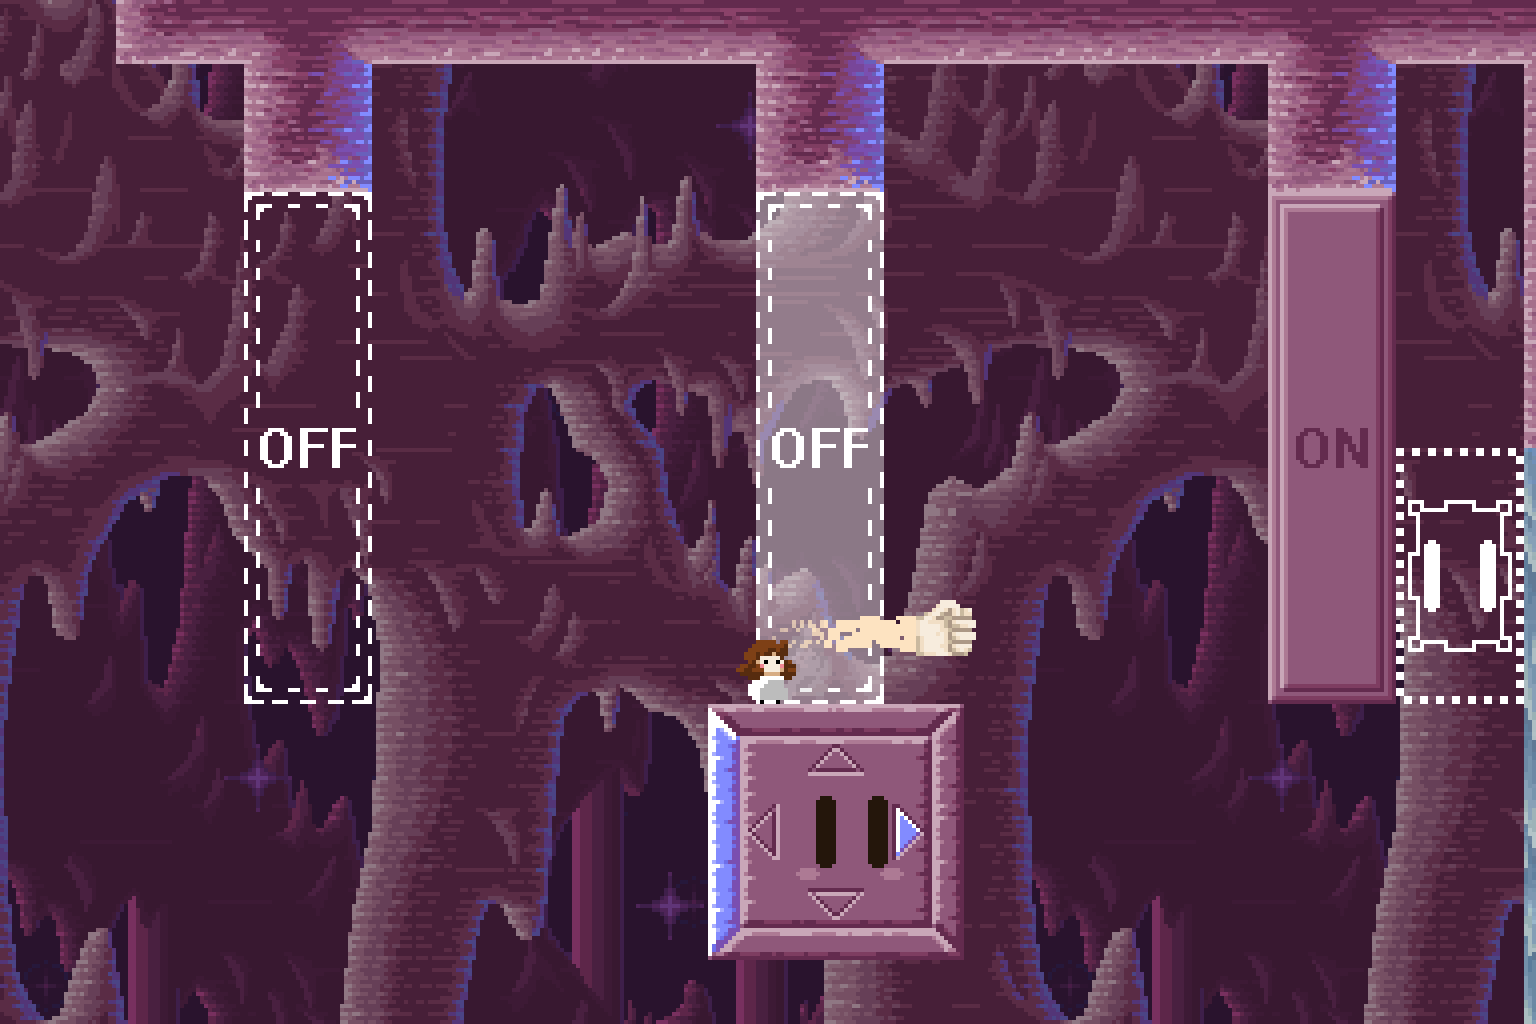 screenshot: Vivi is standing in a cave. A key is being punched towards a locked door.